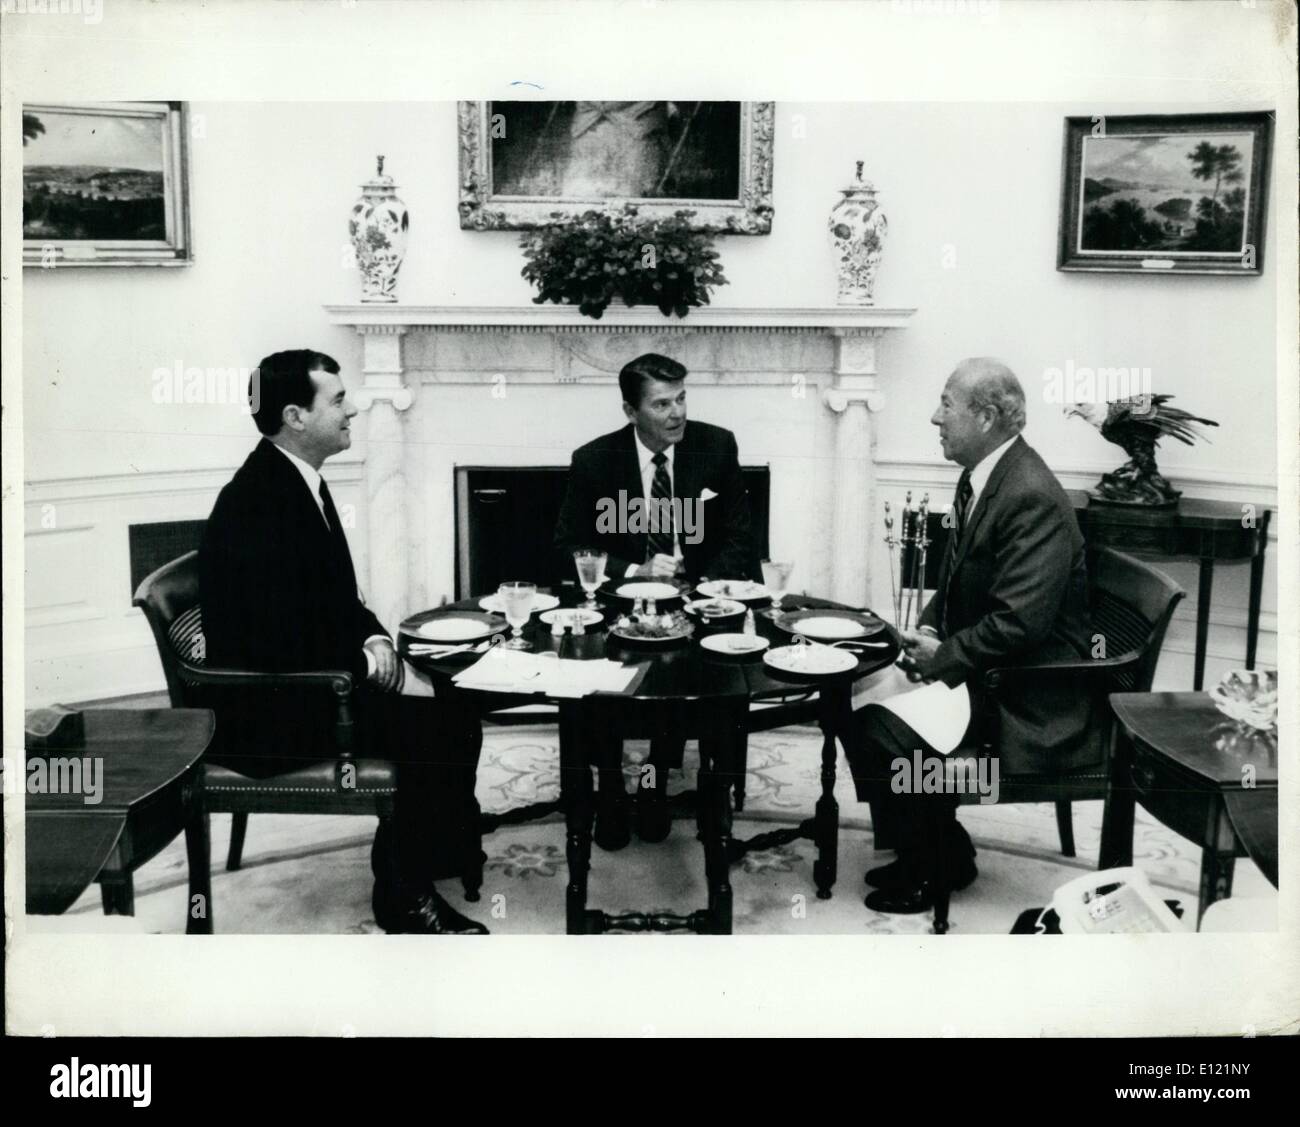 Sep. 09, 1982 - Solving The World's Problems: President Ronald Reagan is shown as he met with his Secretary of State, George Shultz and his National Security Advisor, William Clark during a luncheon meeting in the Oval office of the White House. Stock Photo